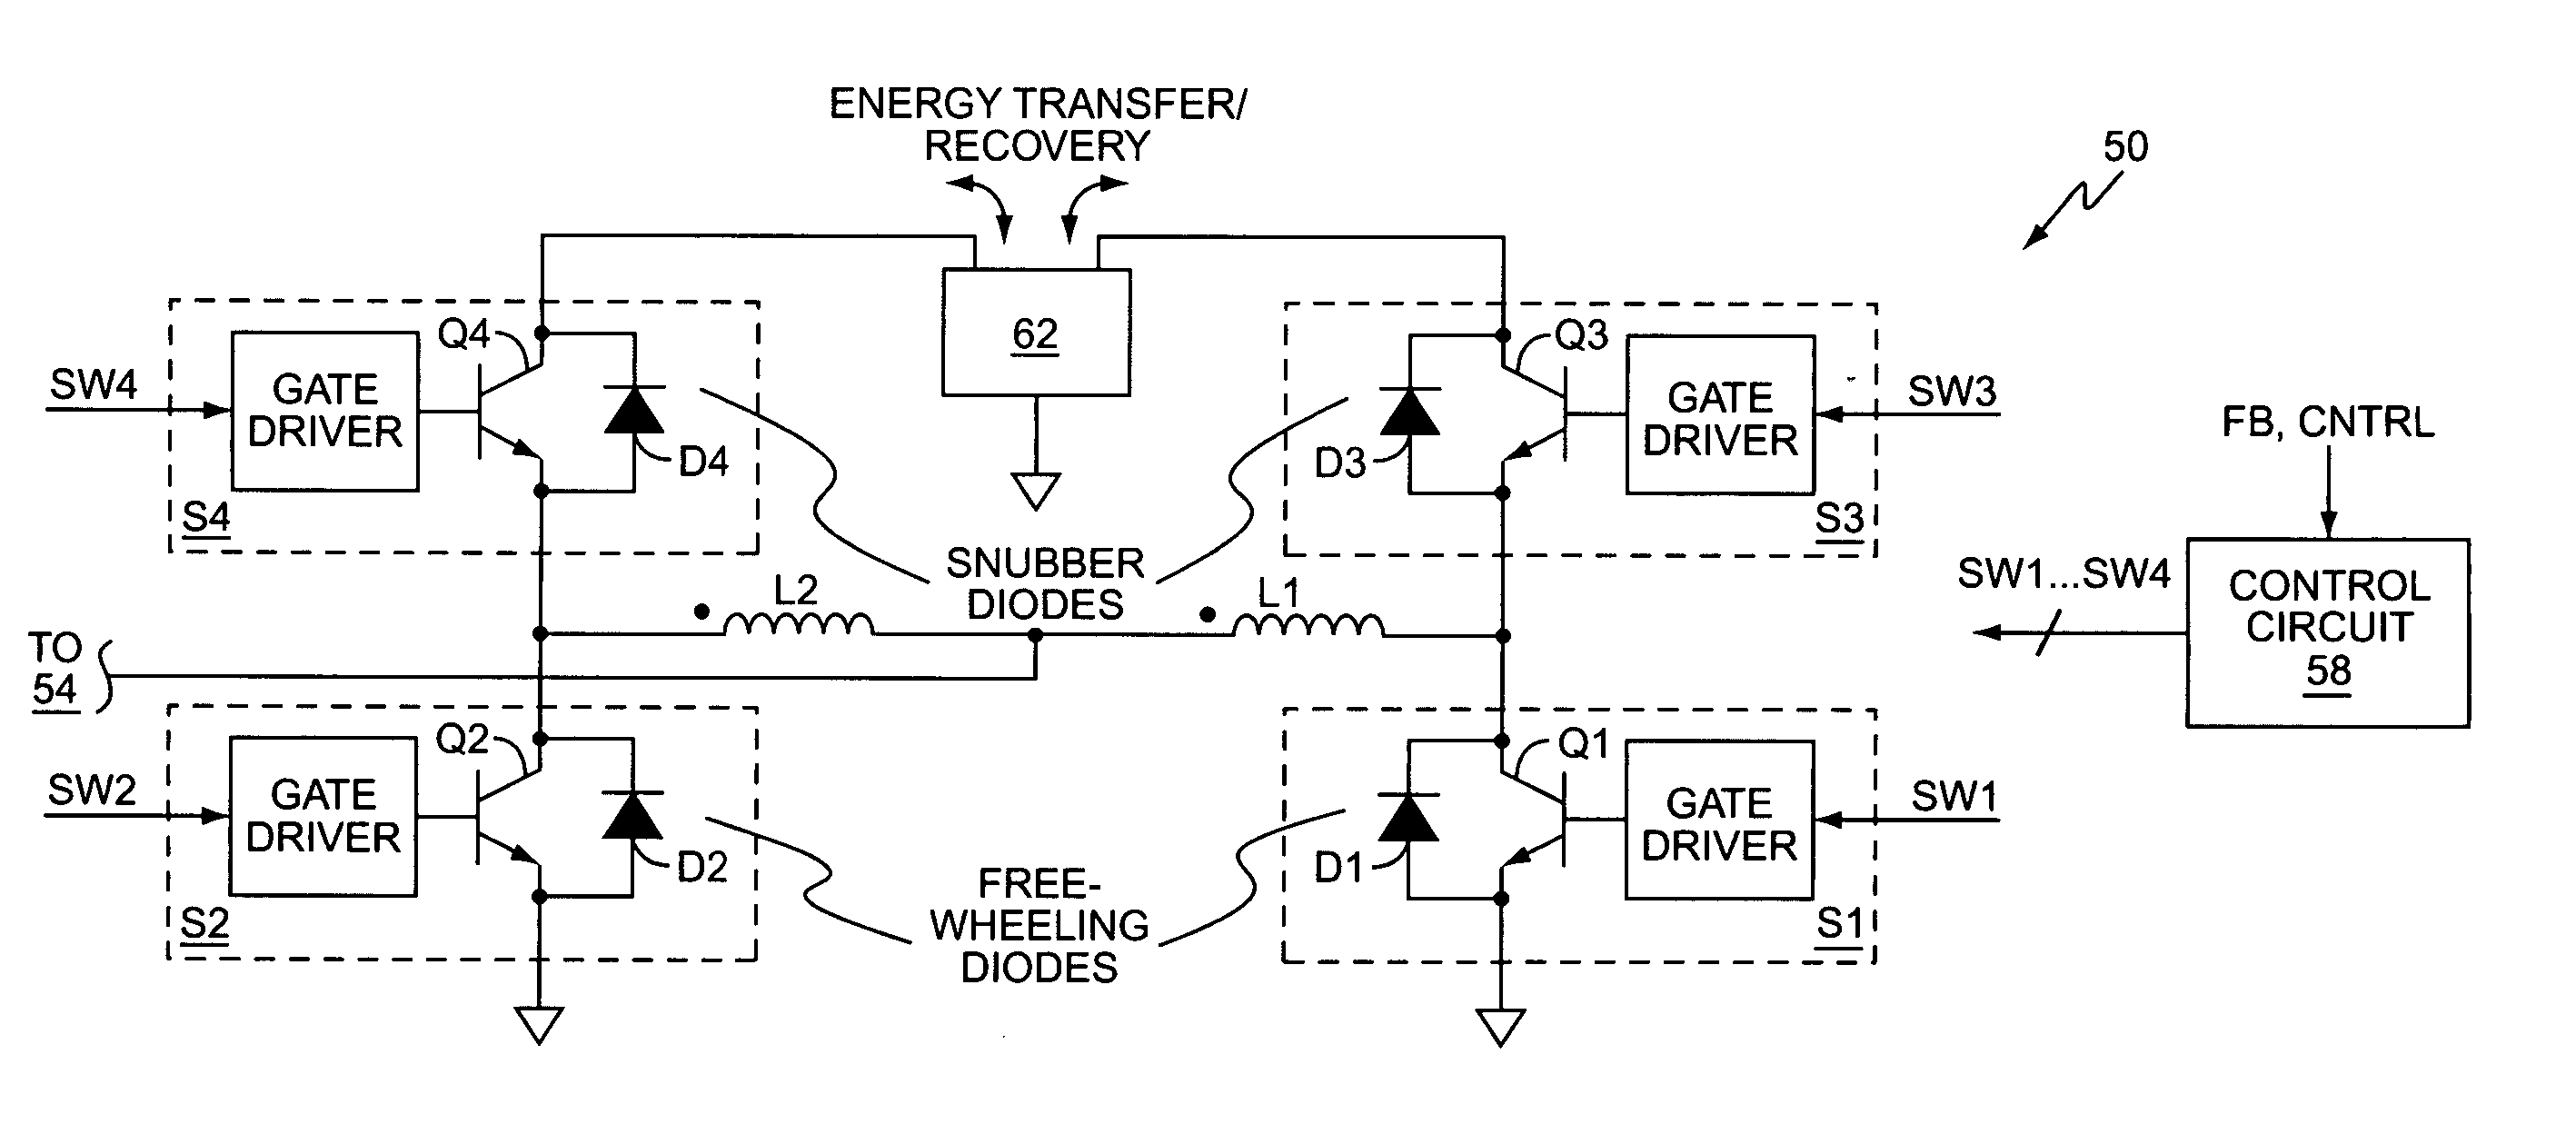 Push-pull inverter with snubber energy recovery